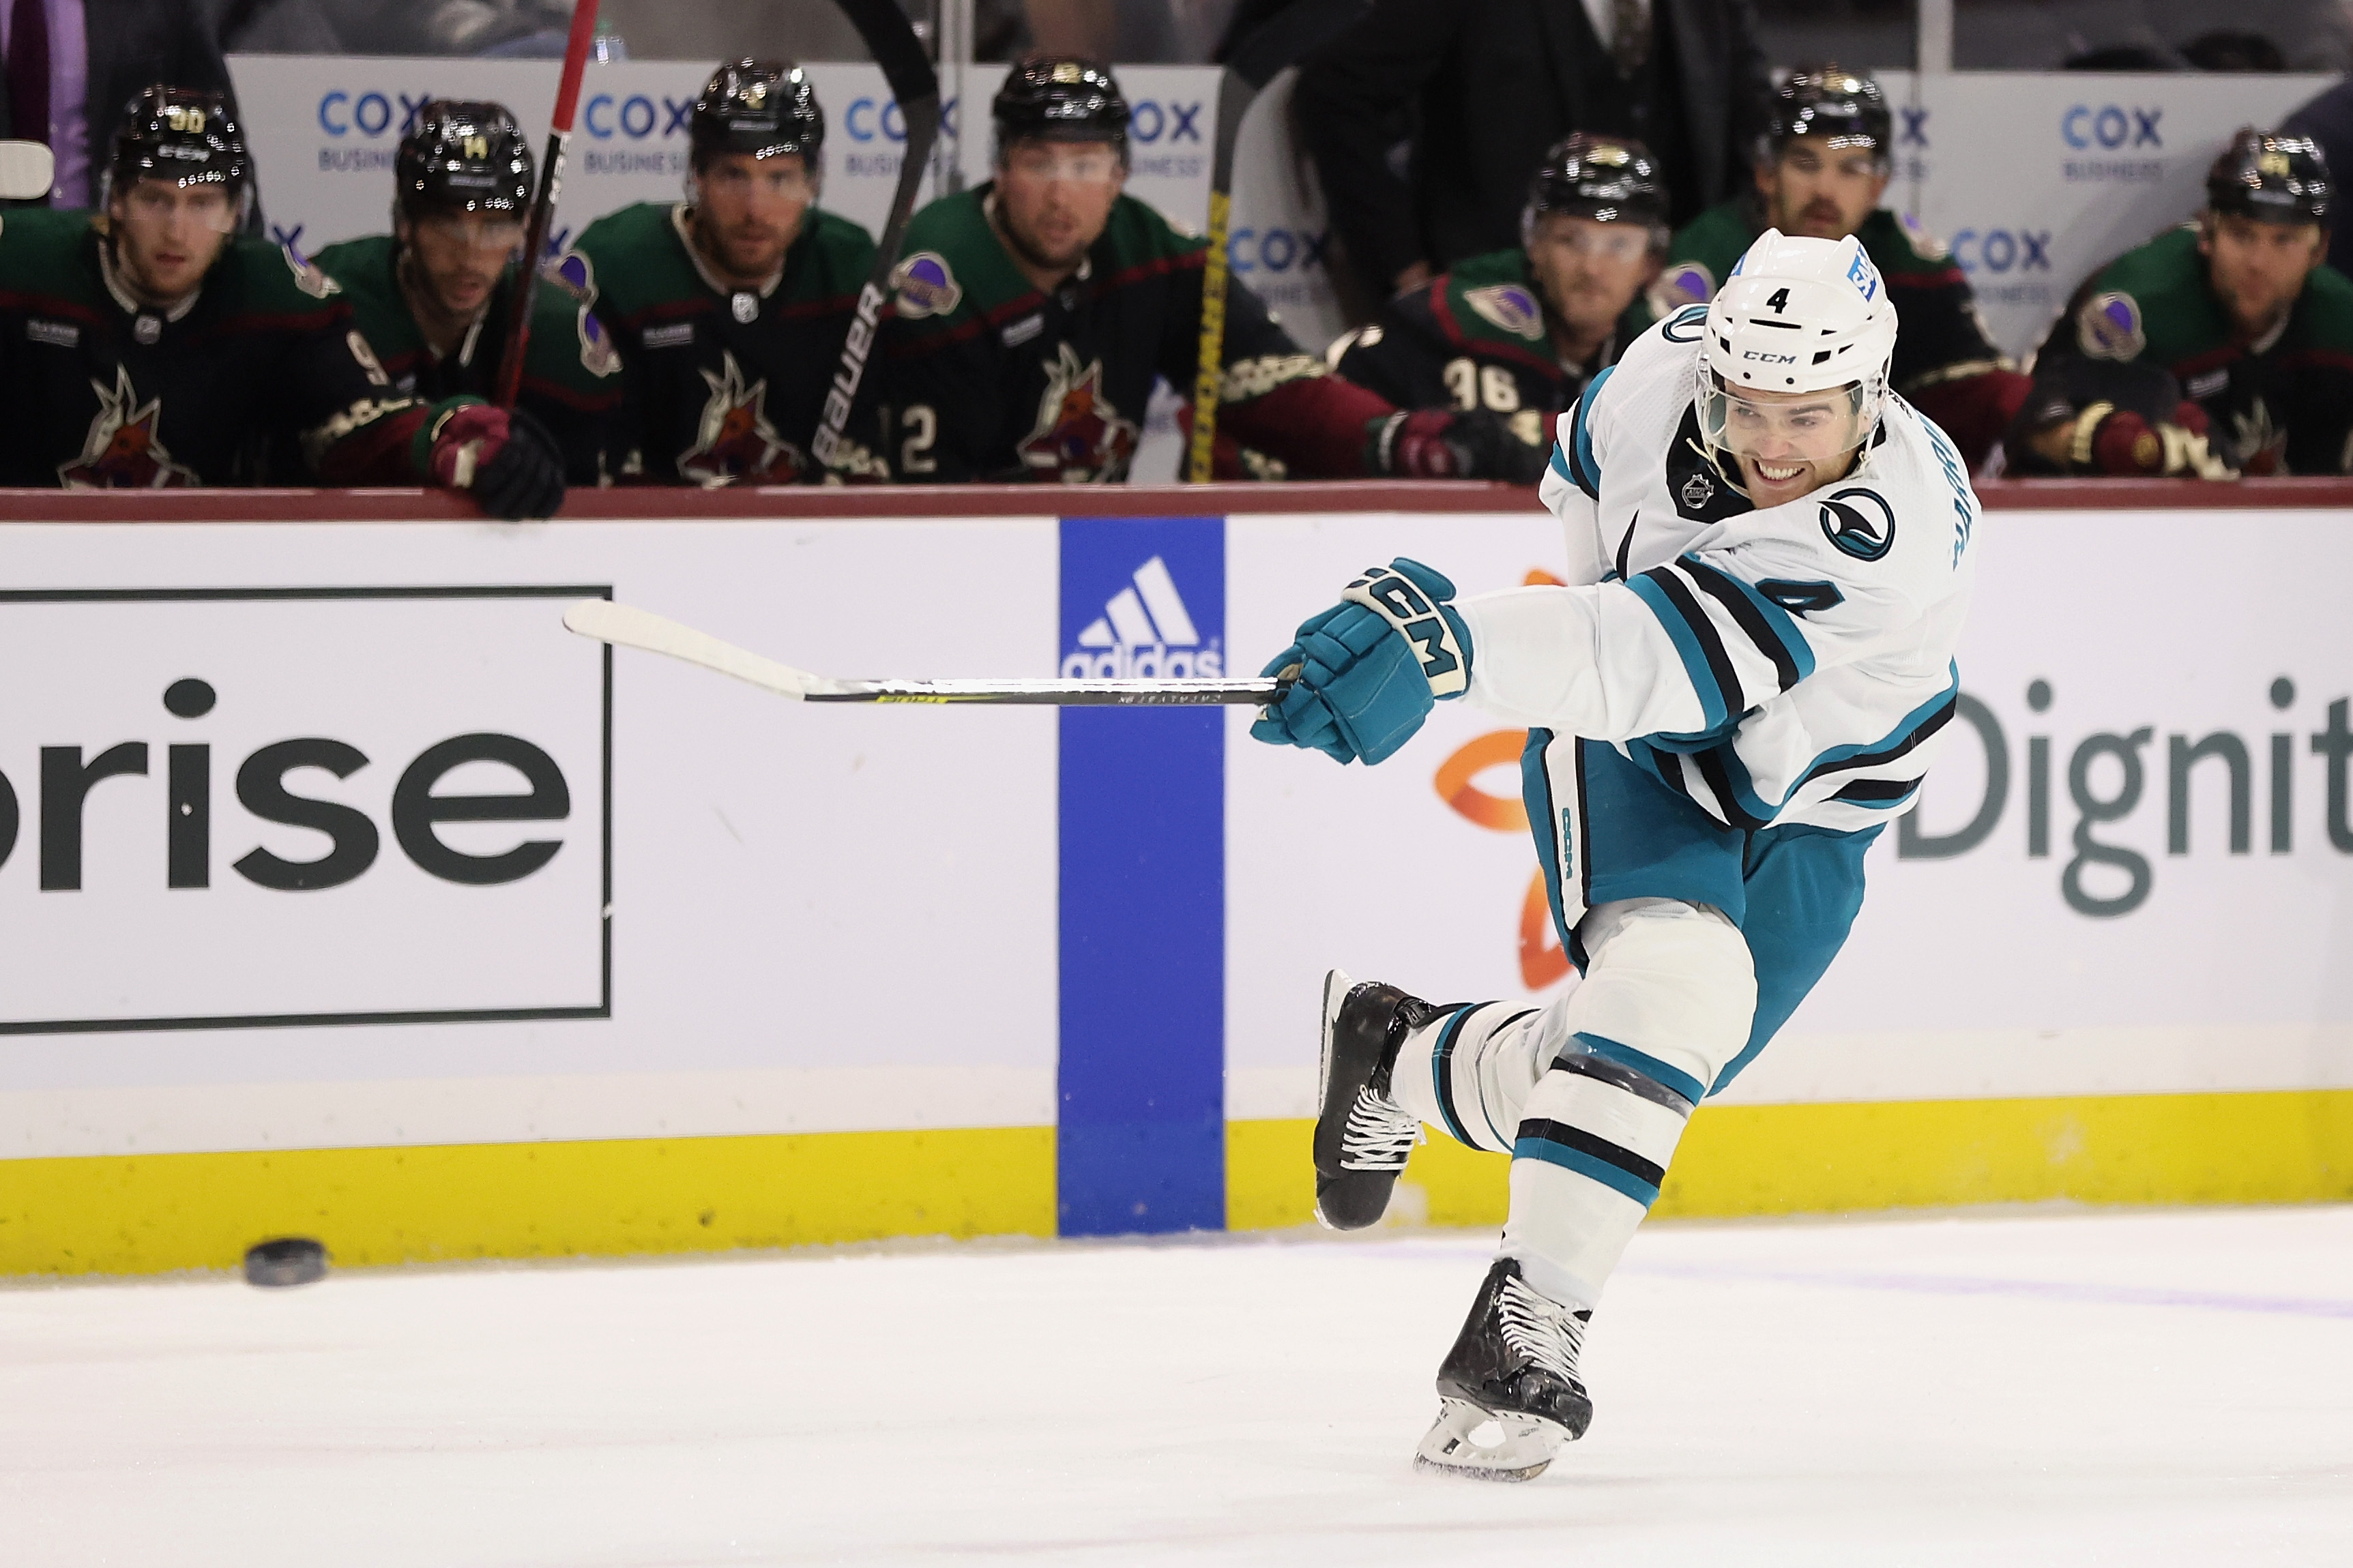 Scott Harrington #4 of the San Jose Sharks shoots the puck during the first period of the NHL game against the Arizona Coyotes at Mullett Arena on January 10, 2023 in Tempe, Arizona.